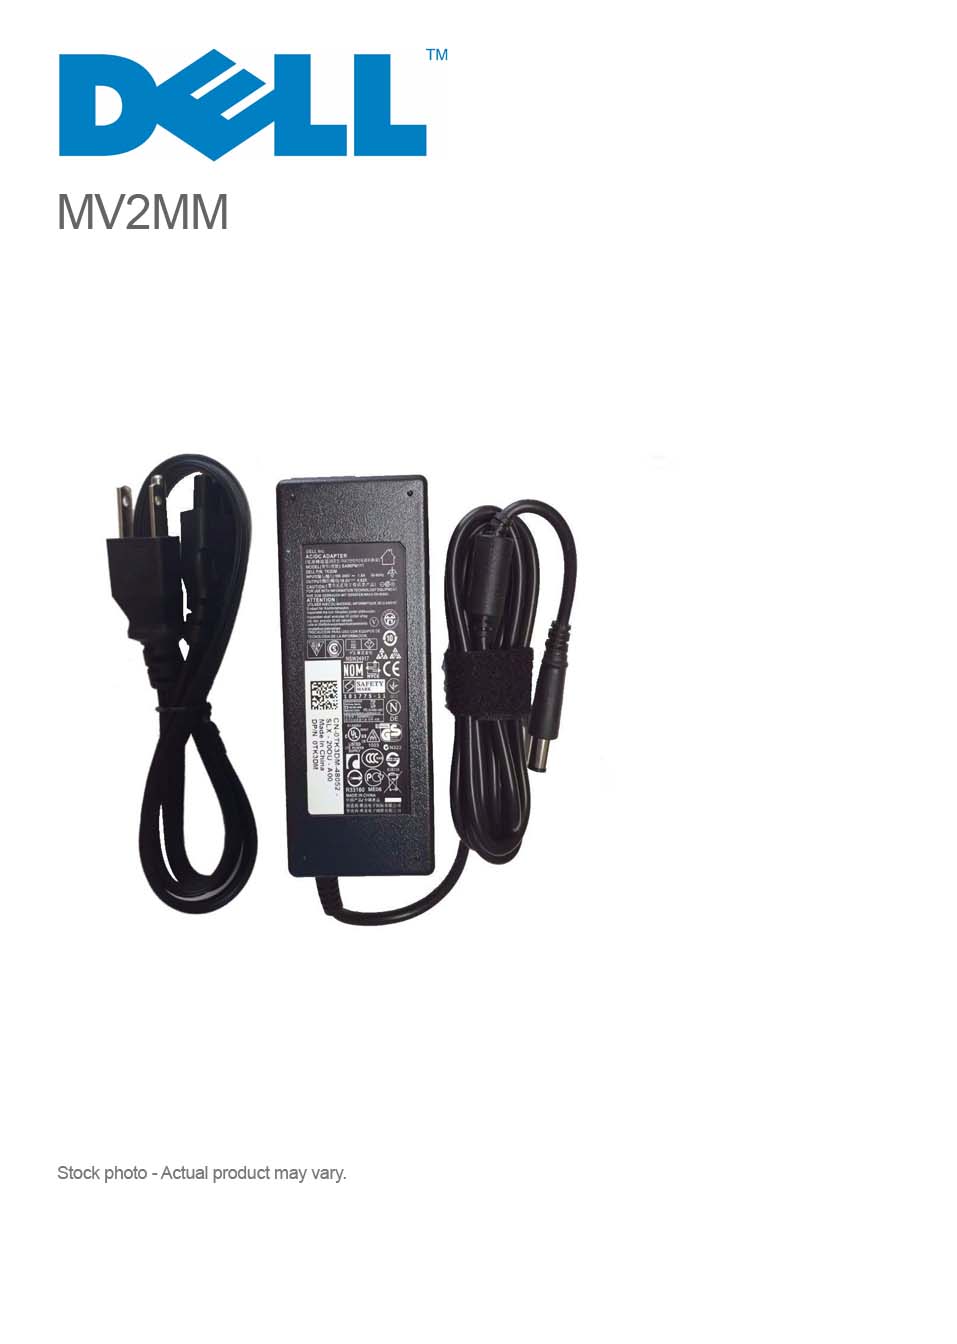 Original 90W 19.5V 4.62A Dell MV2MM AC Adapter Charger with Power Cord